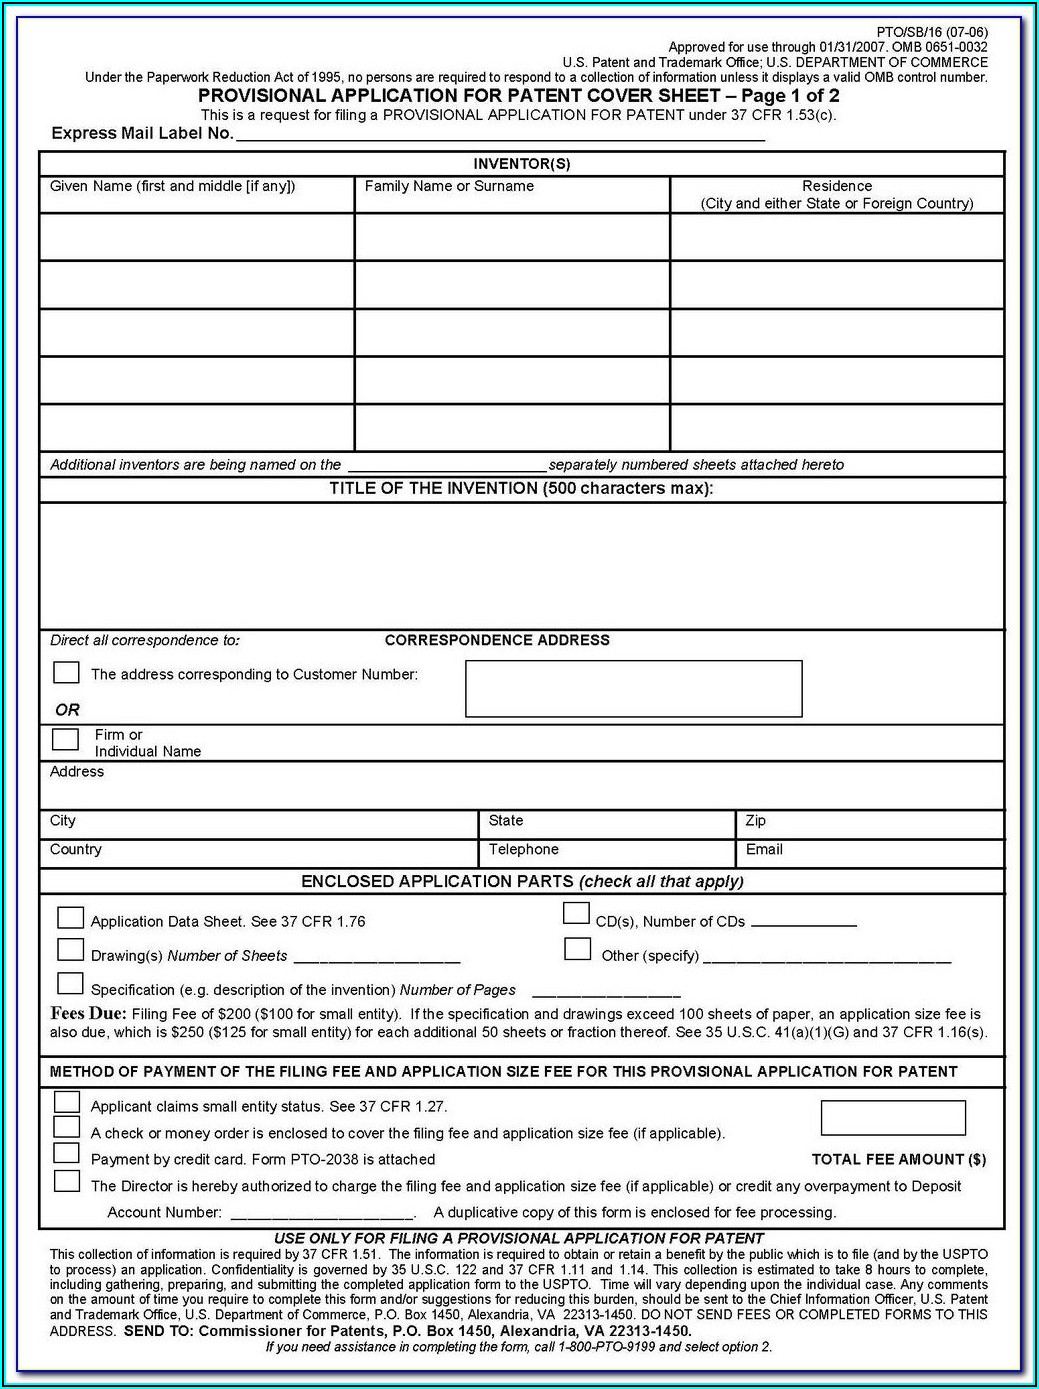 Provisional Patent Forms